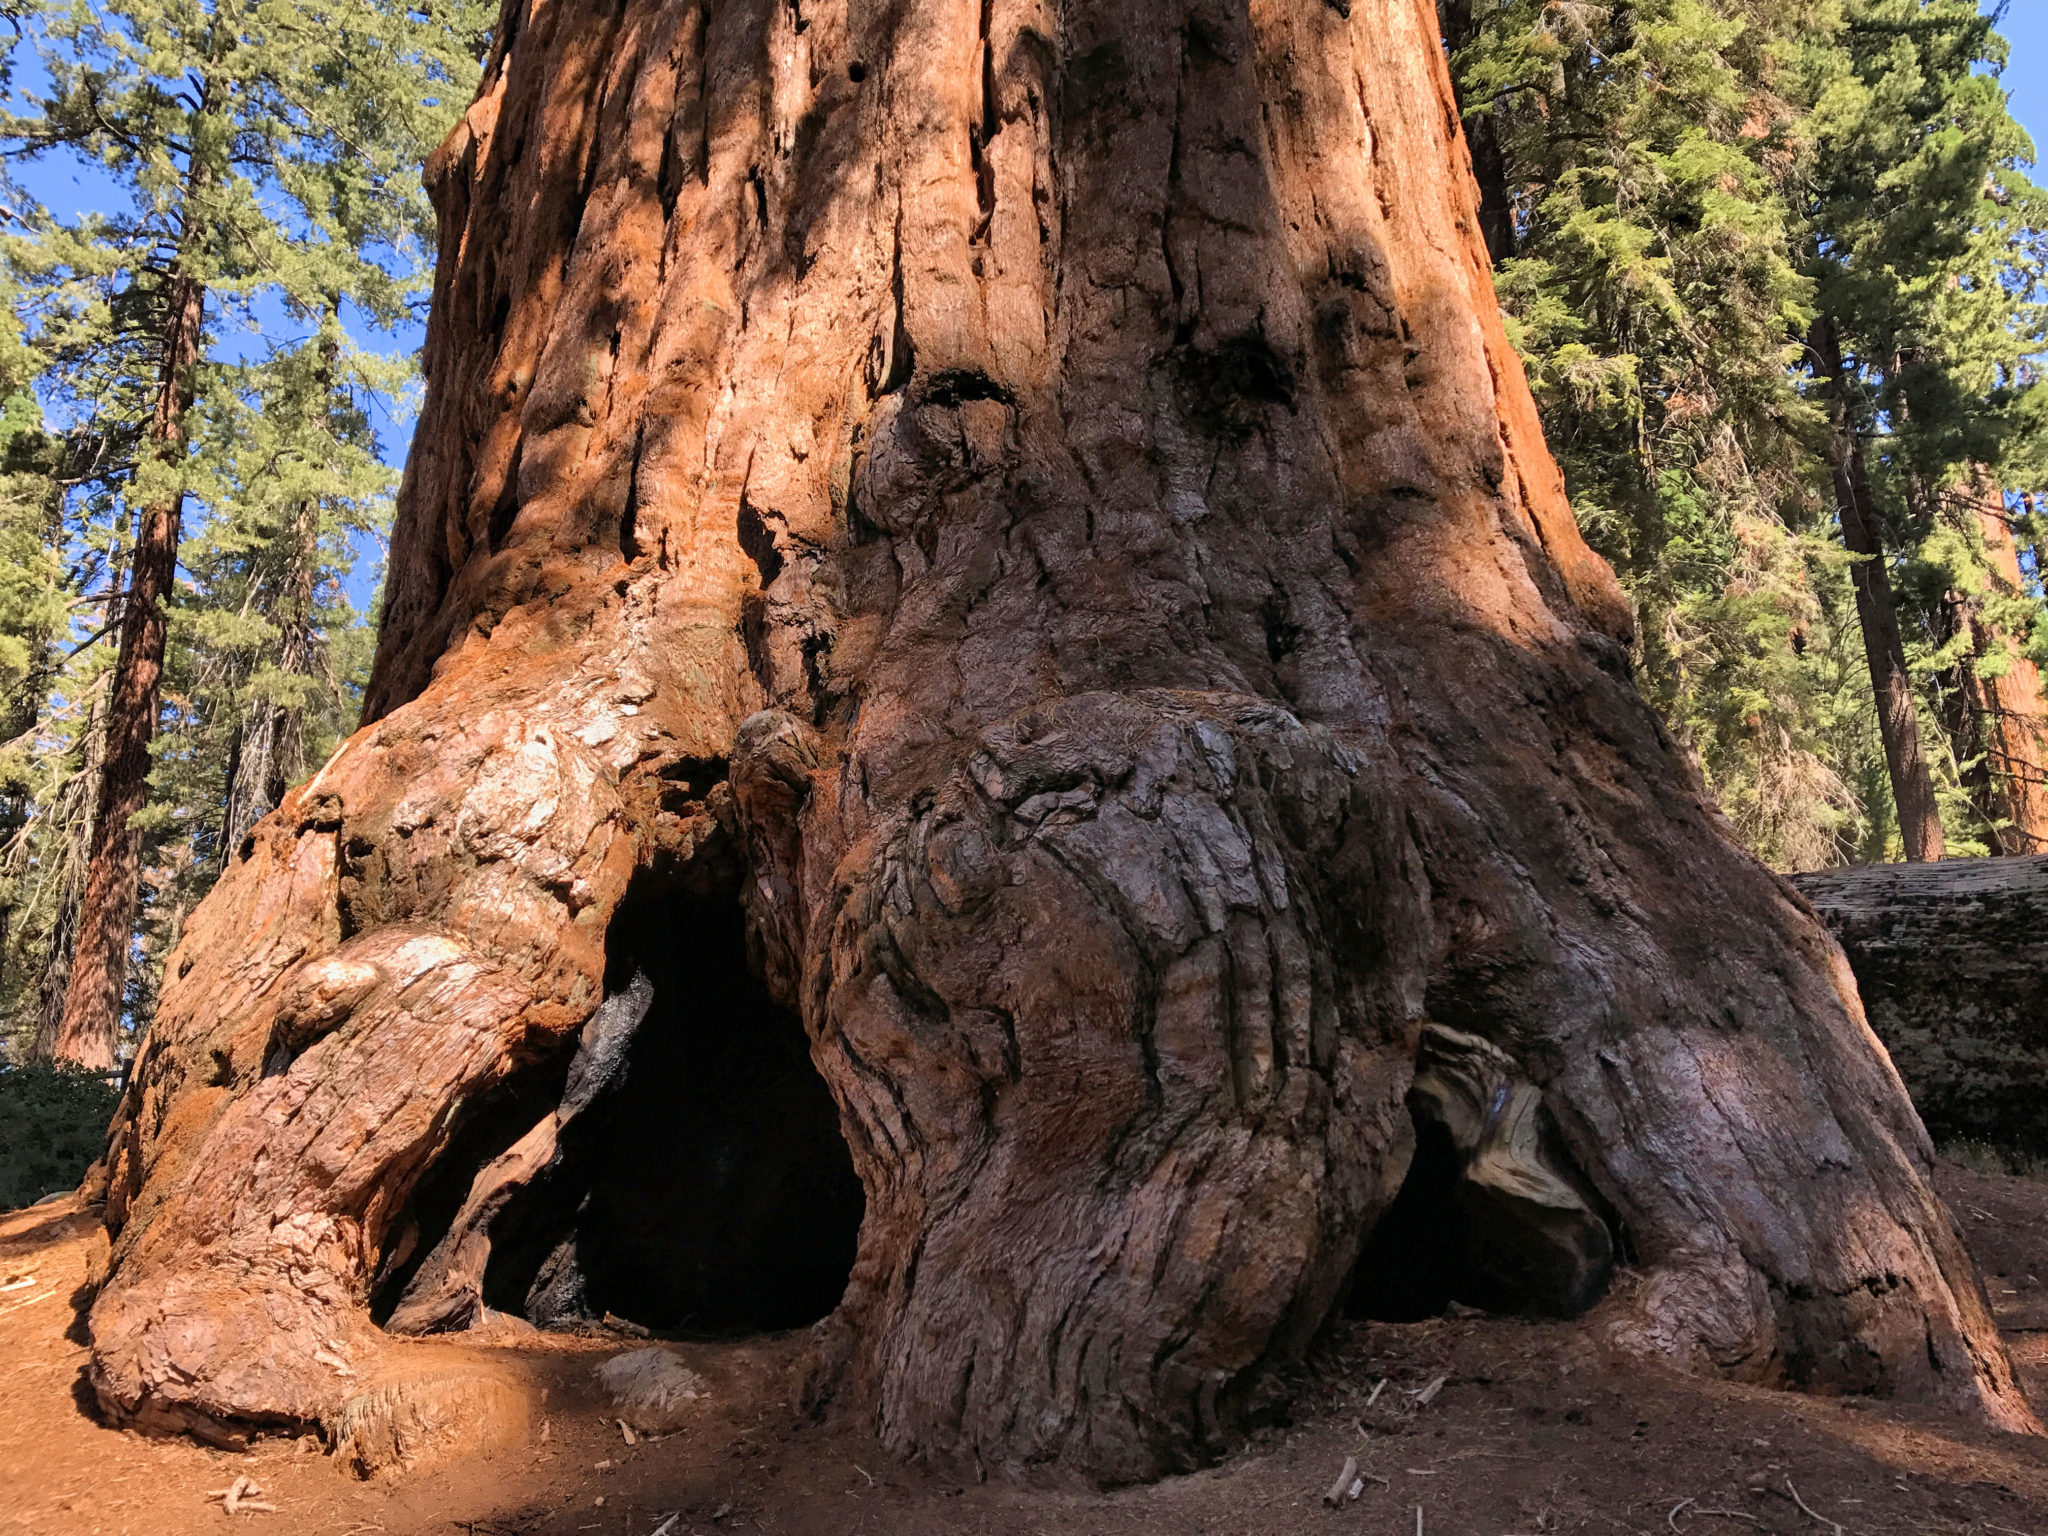 The trunk of a Giant Sequoia in Kings Canyon